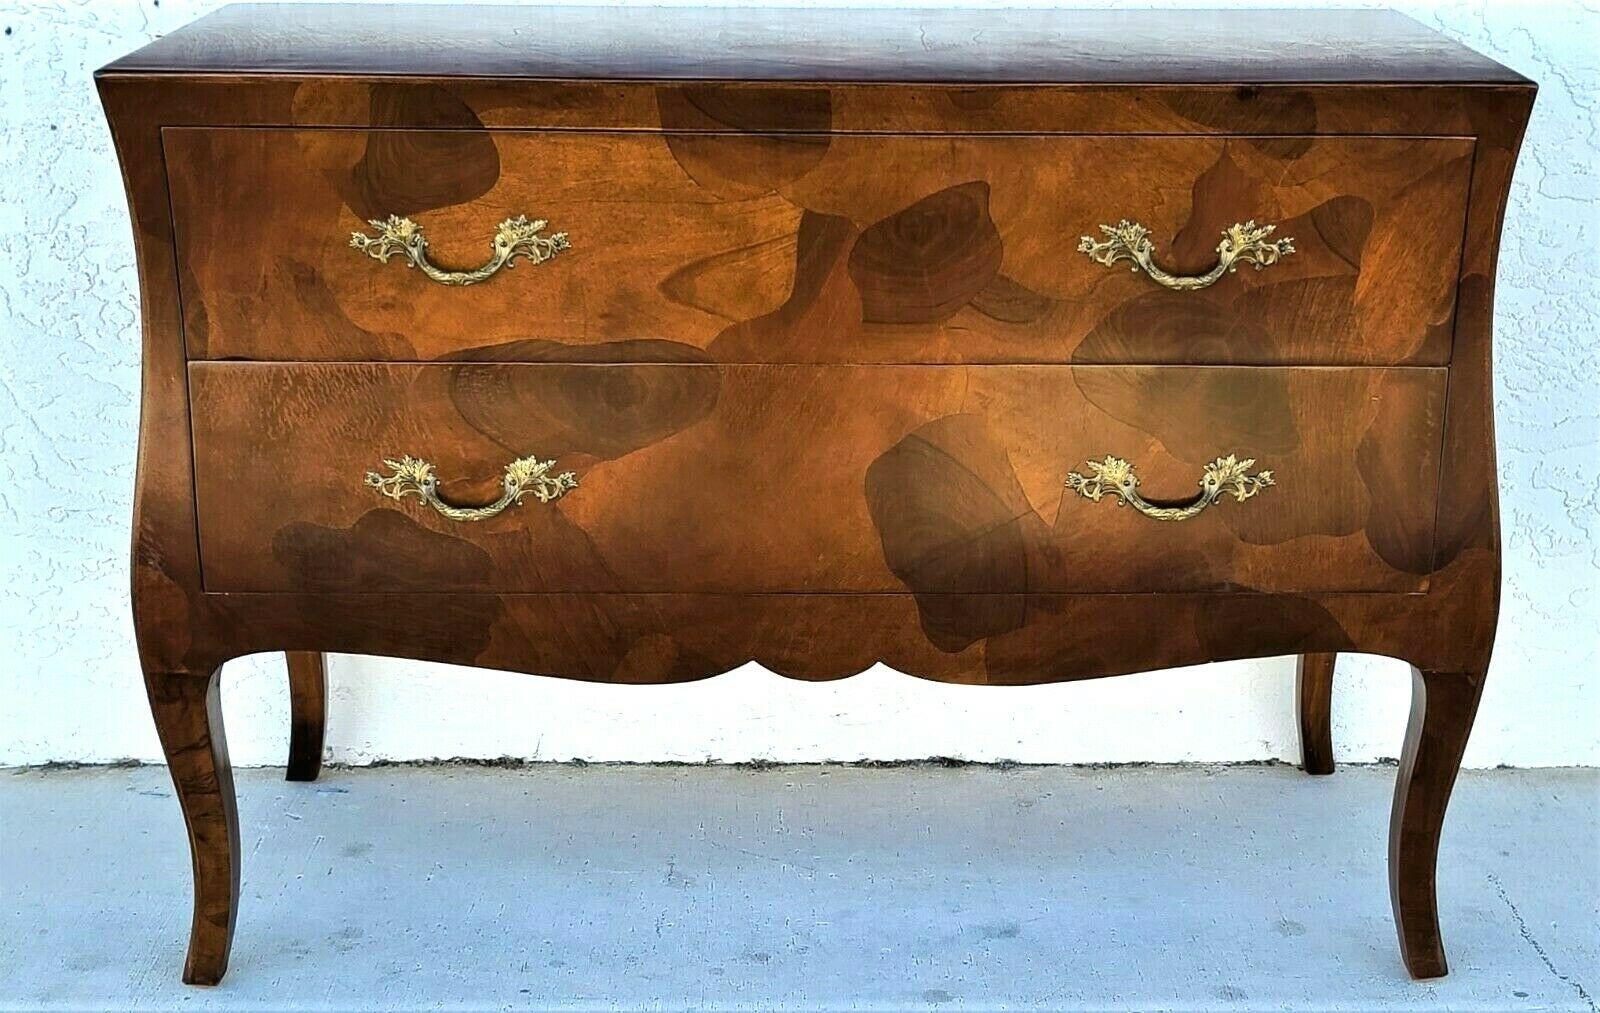 Offering One Of Our Recent Palm Beach Estate Fine Furniture Acquisitions Of A Vintage Multi Exotic Wood Credenza Buffet Dresser 2 Drawer

Approximate Measurements in Inches
31.75